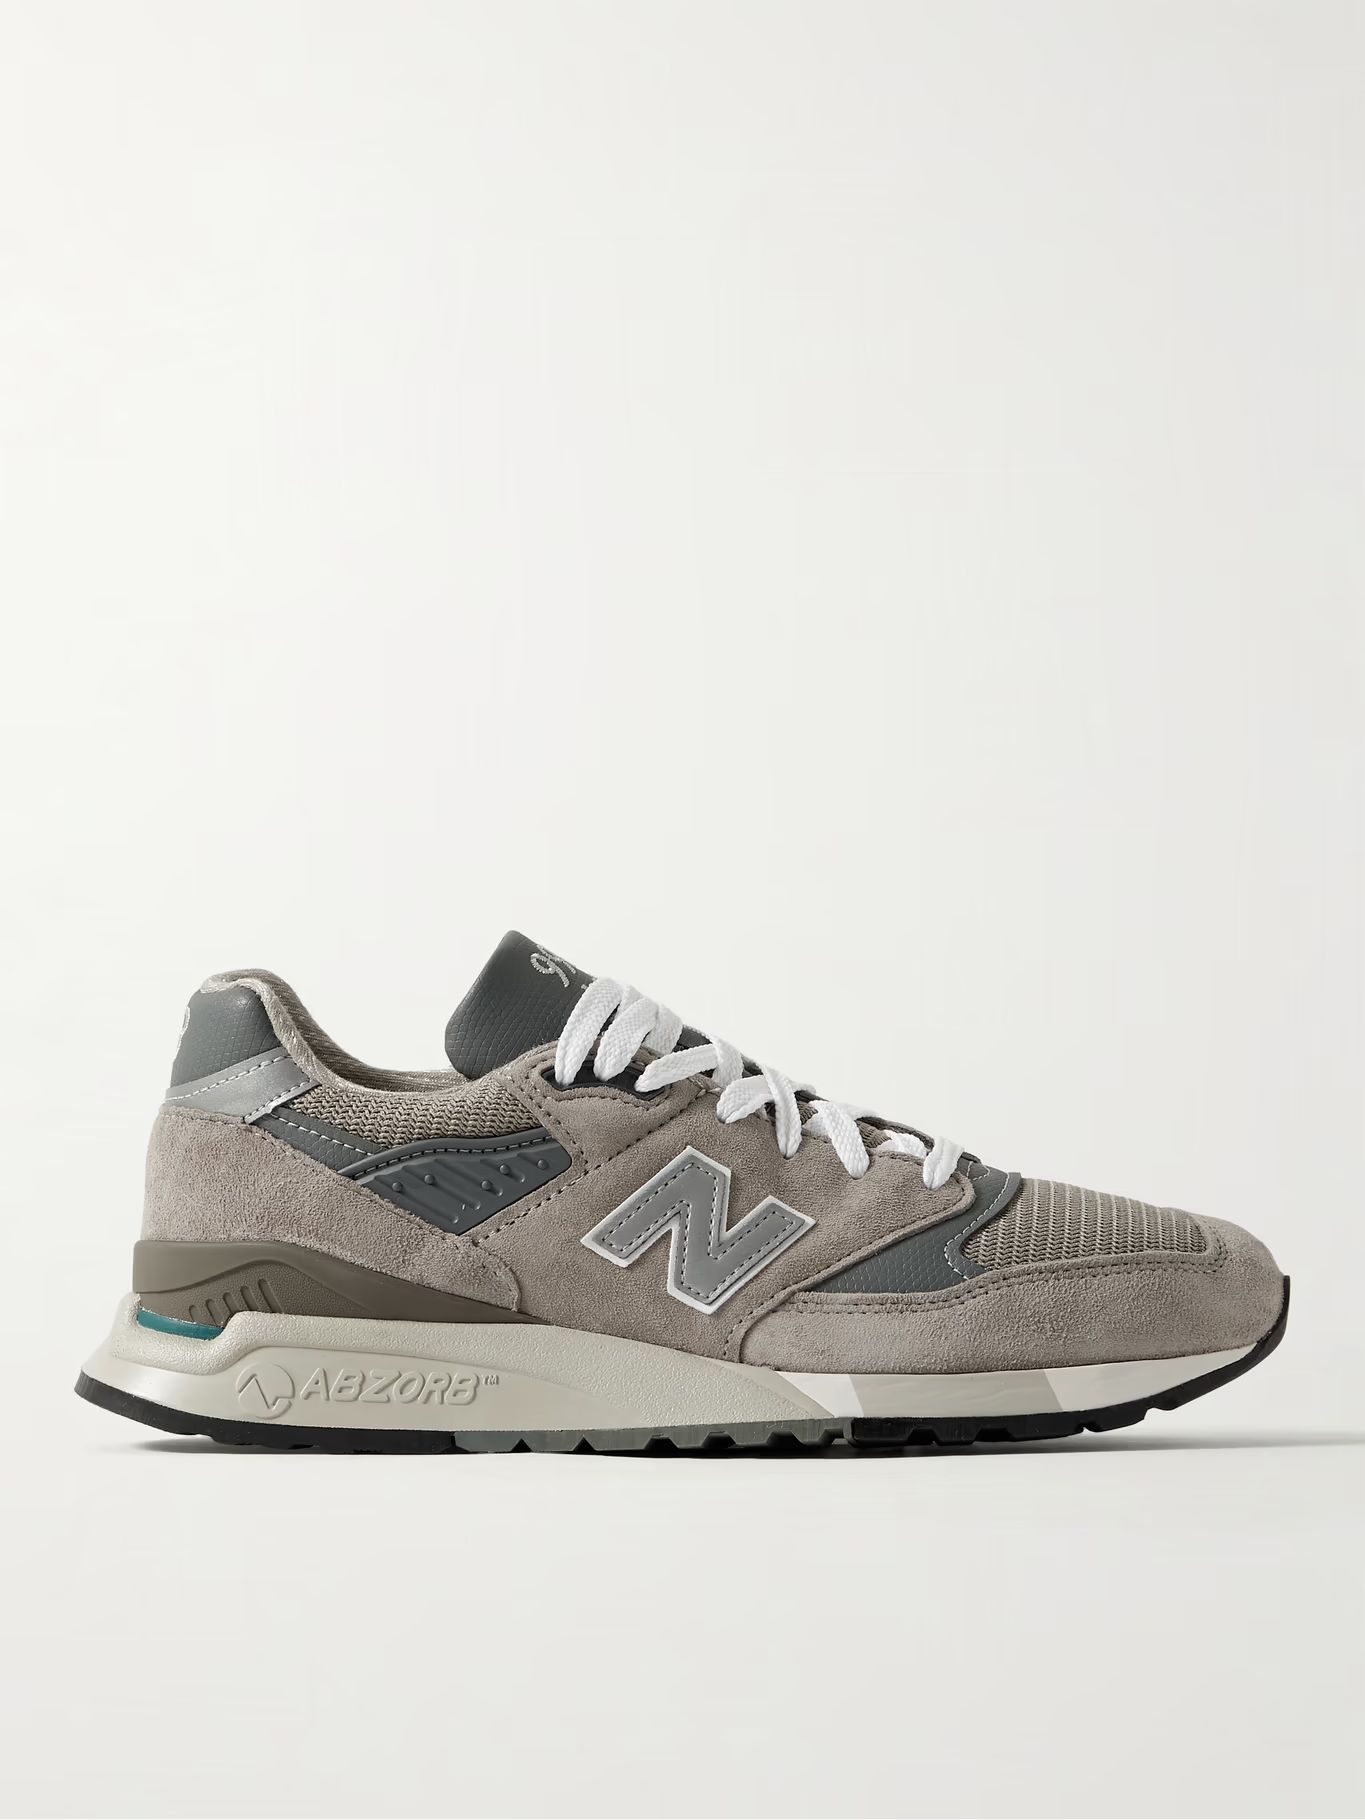 998 Core Rubber-Trimmed Leather, Mesh and Suede Sneakers | Mr Porter (US & CA)